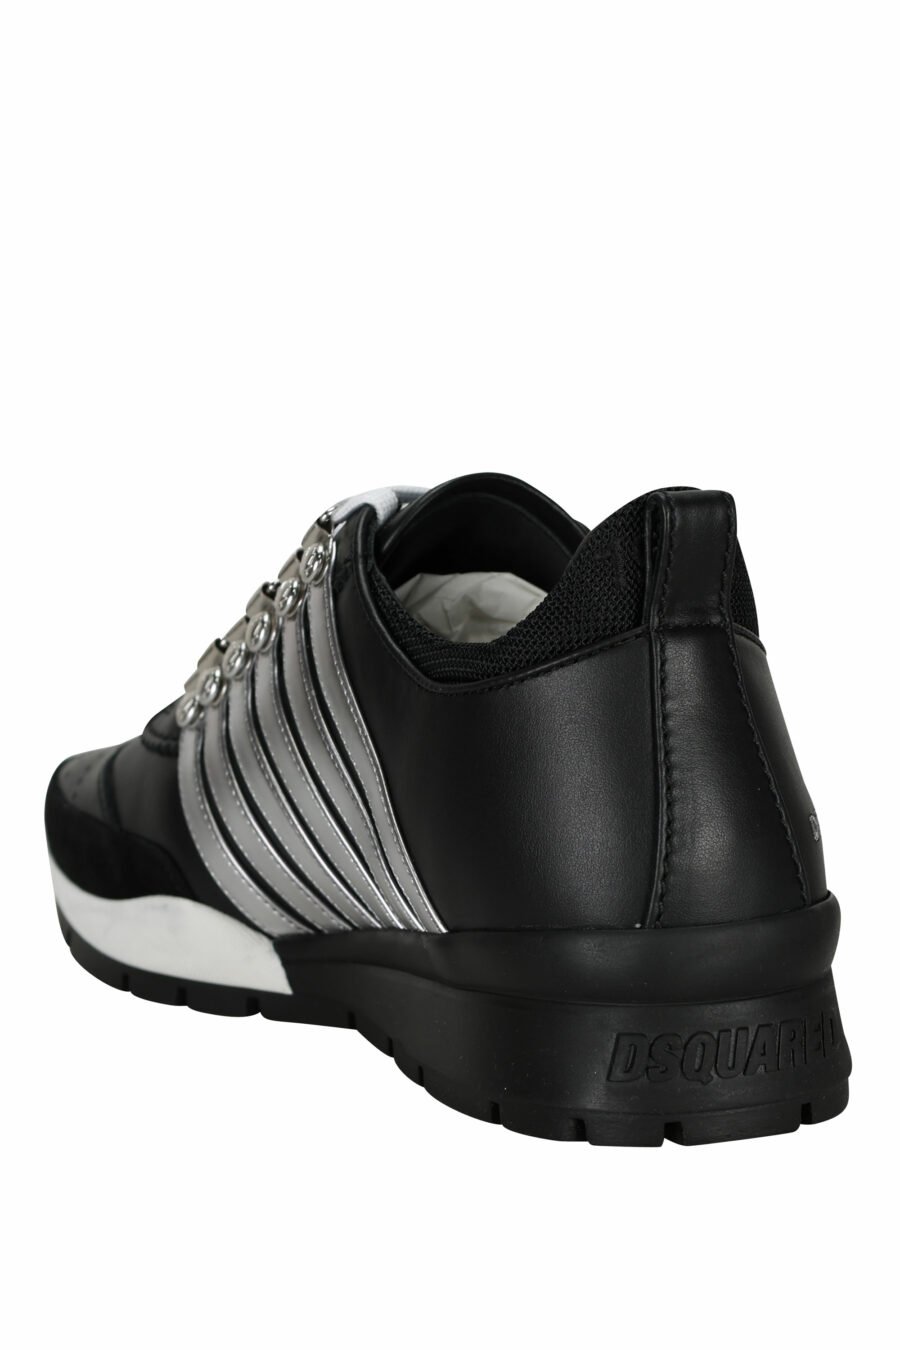 Black trainers with silver lines and bicolour sole - 8055777301289 3